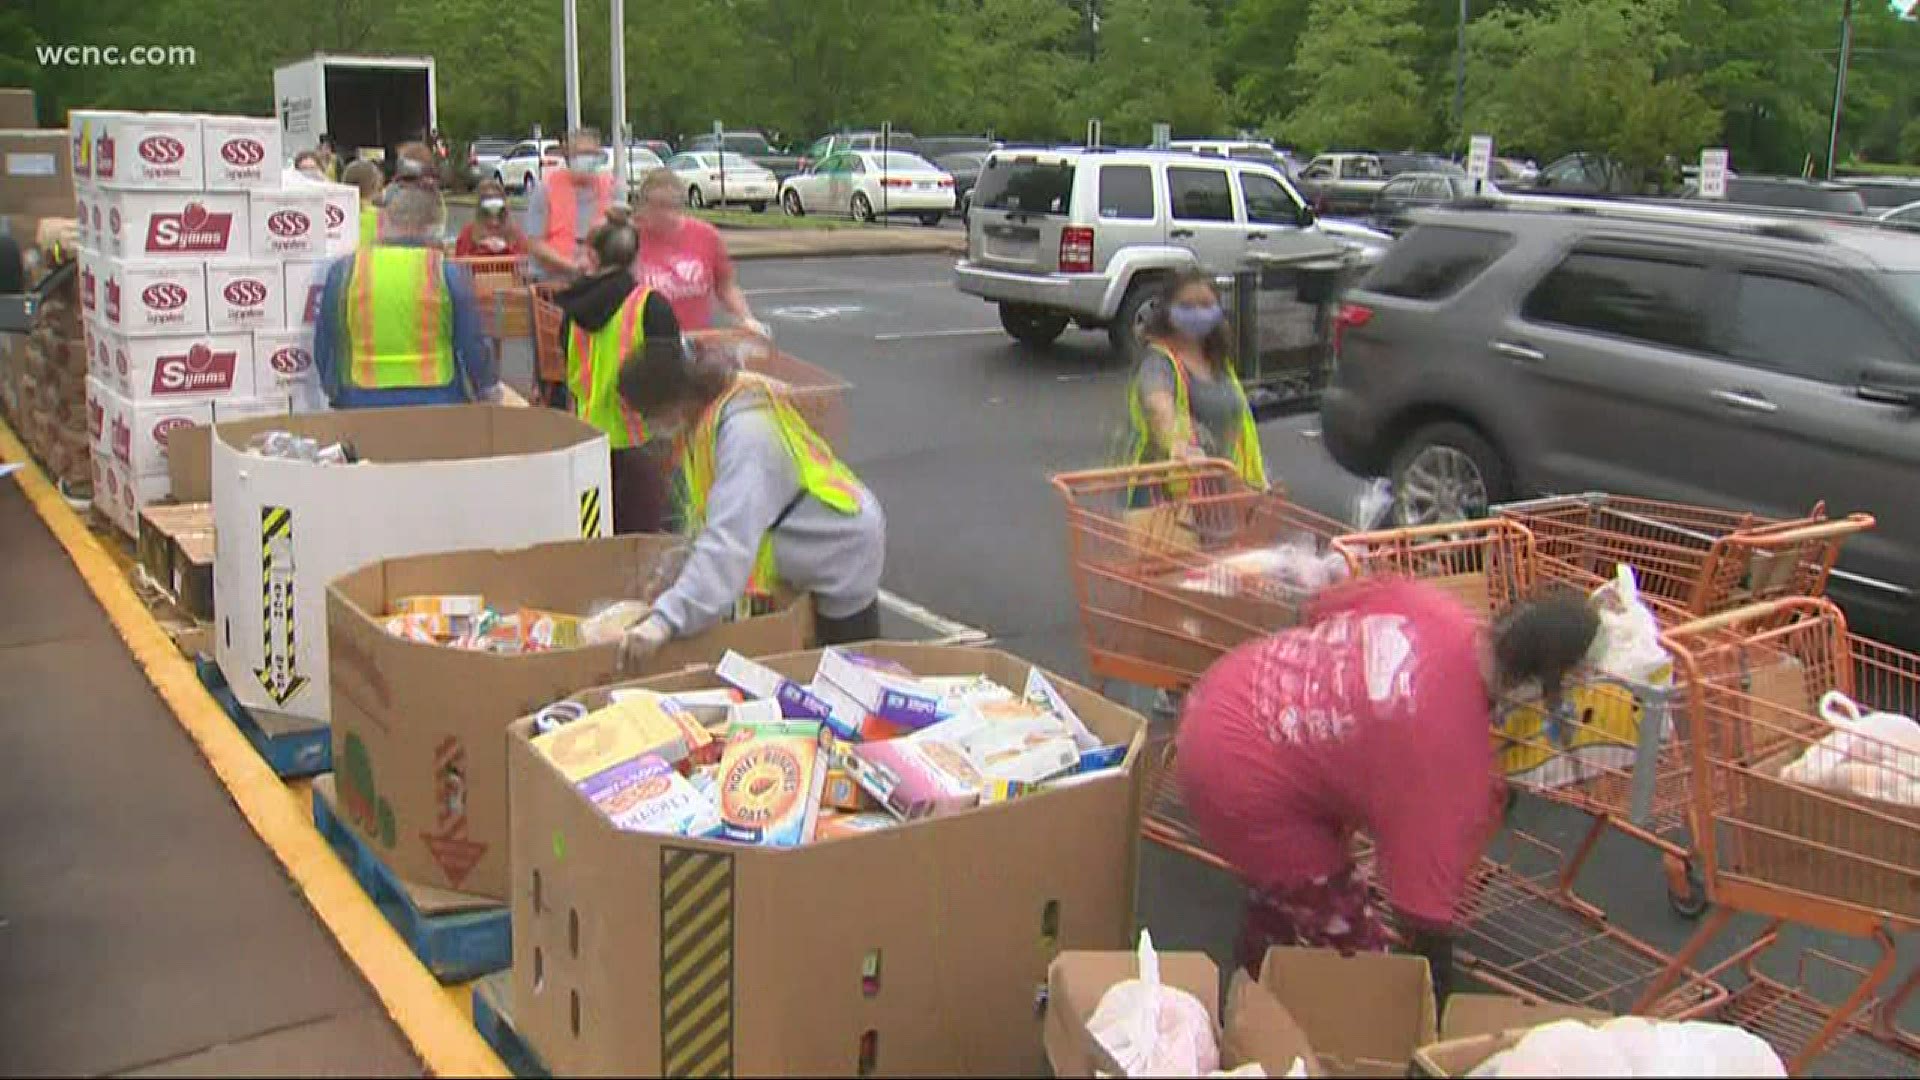 Just two weeks after a record-breaking turnout at a food pantry in Monroe, churchgoers were at it again in Waxhaw.